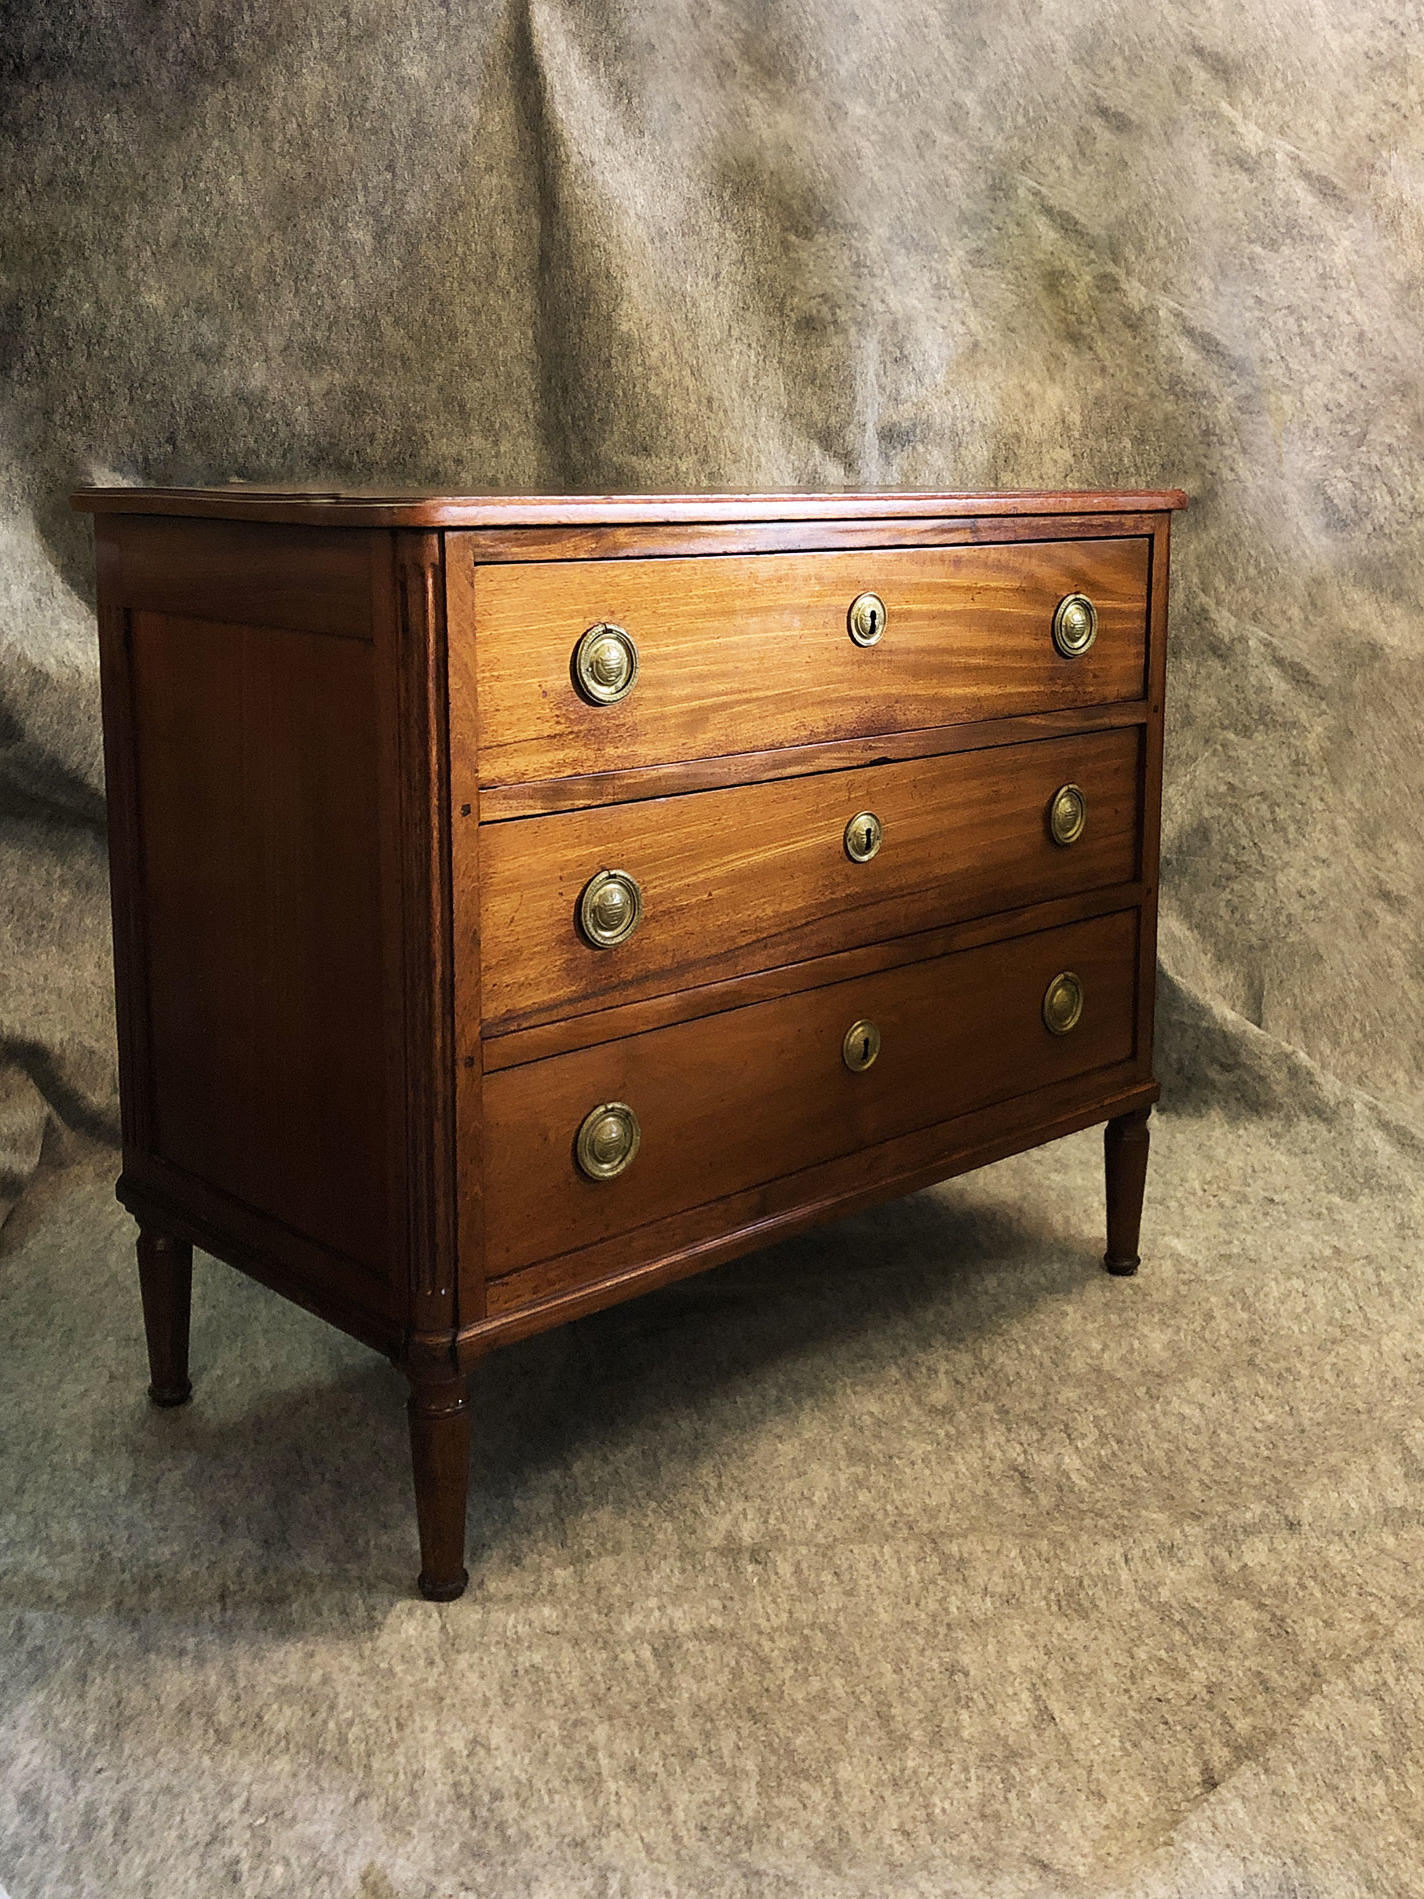 Directory Style Mahogany Chest of Drawers. France, 19th Century